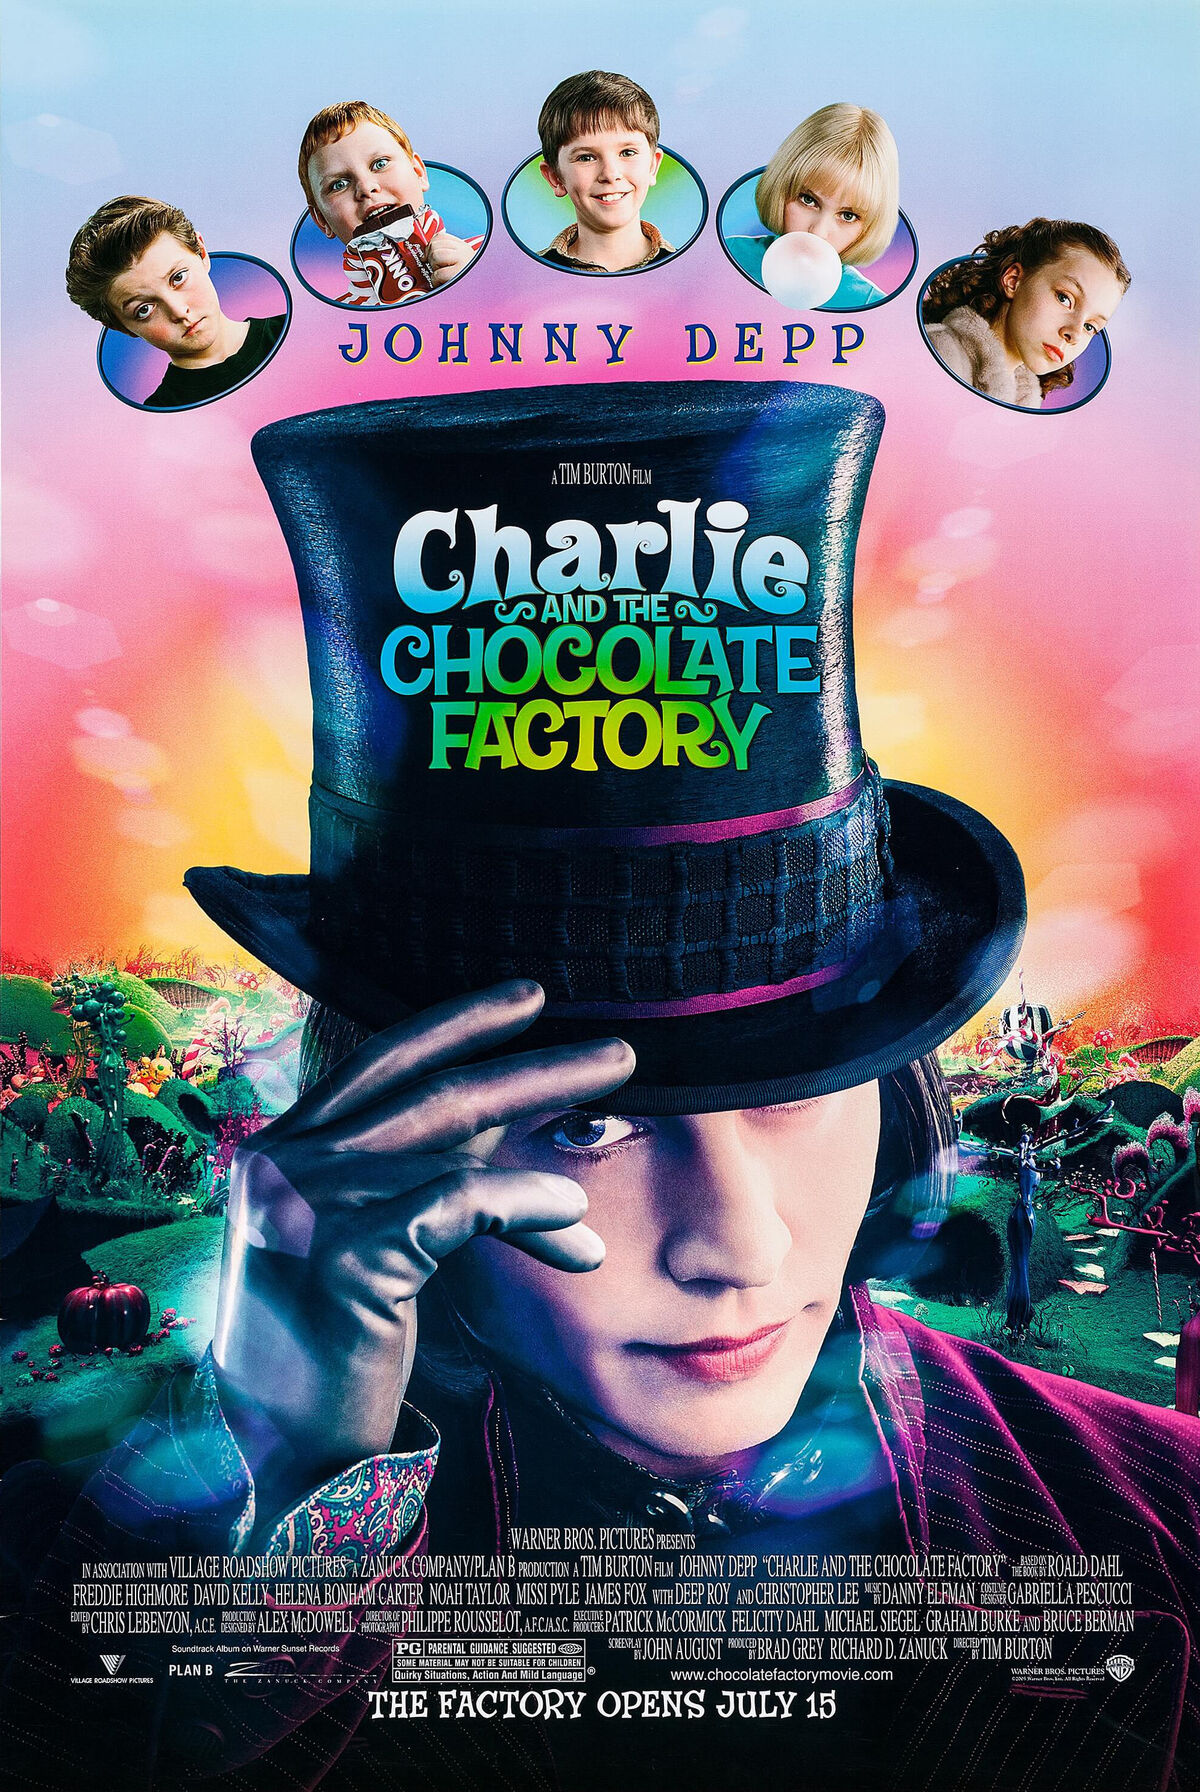 https://static.wikia.nocookie.net/warner-bros-entertainment/images/4/46/Charlie_and_the_chocolate_factory_poster2.jpg/revision/latest/scale-to-width-down/1200?cb=20180916212704